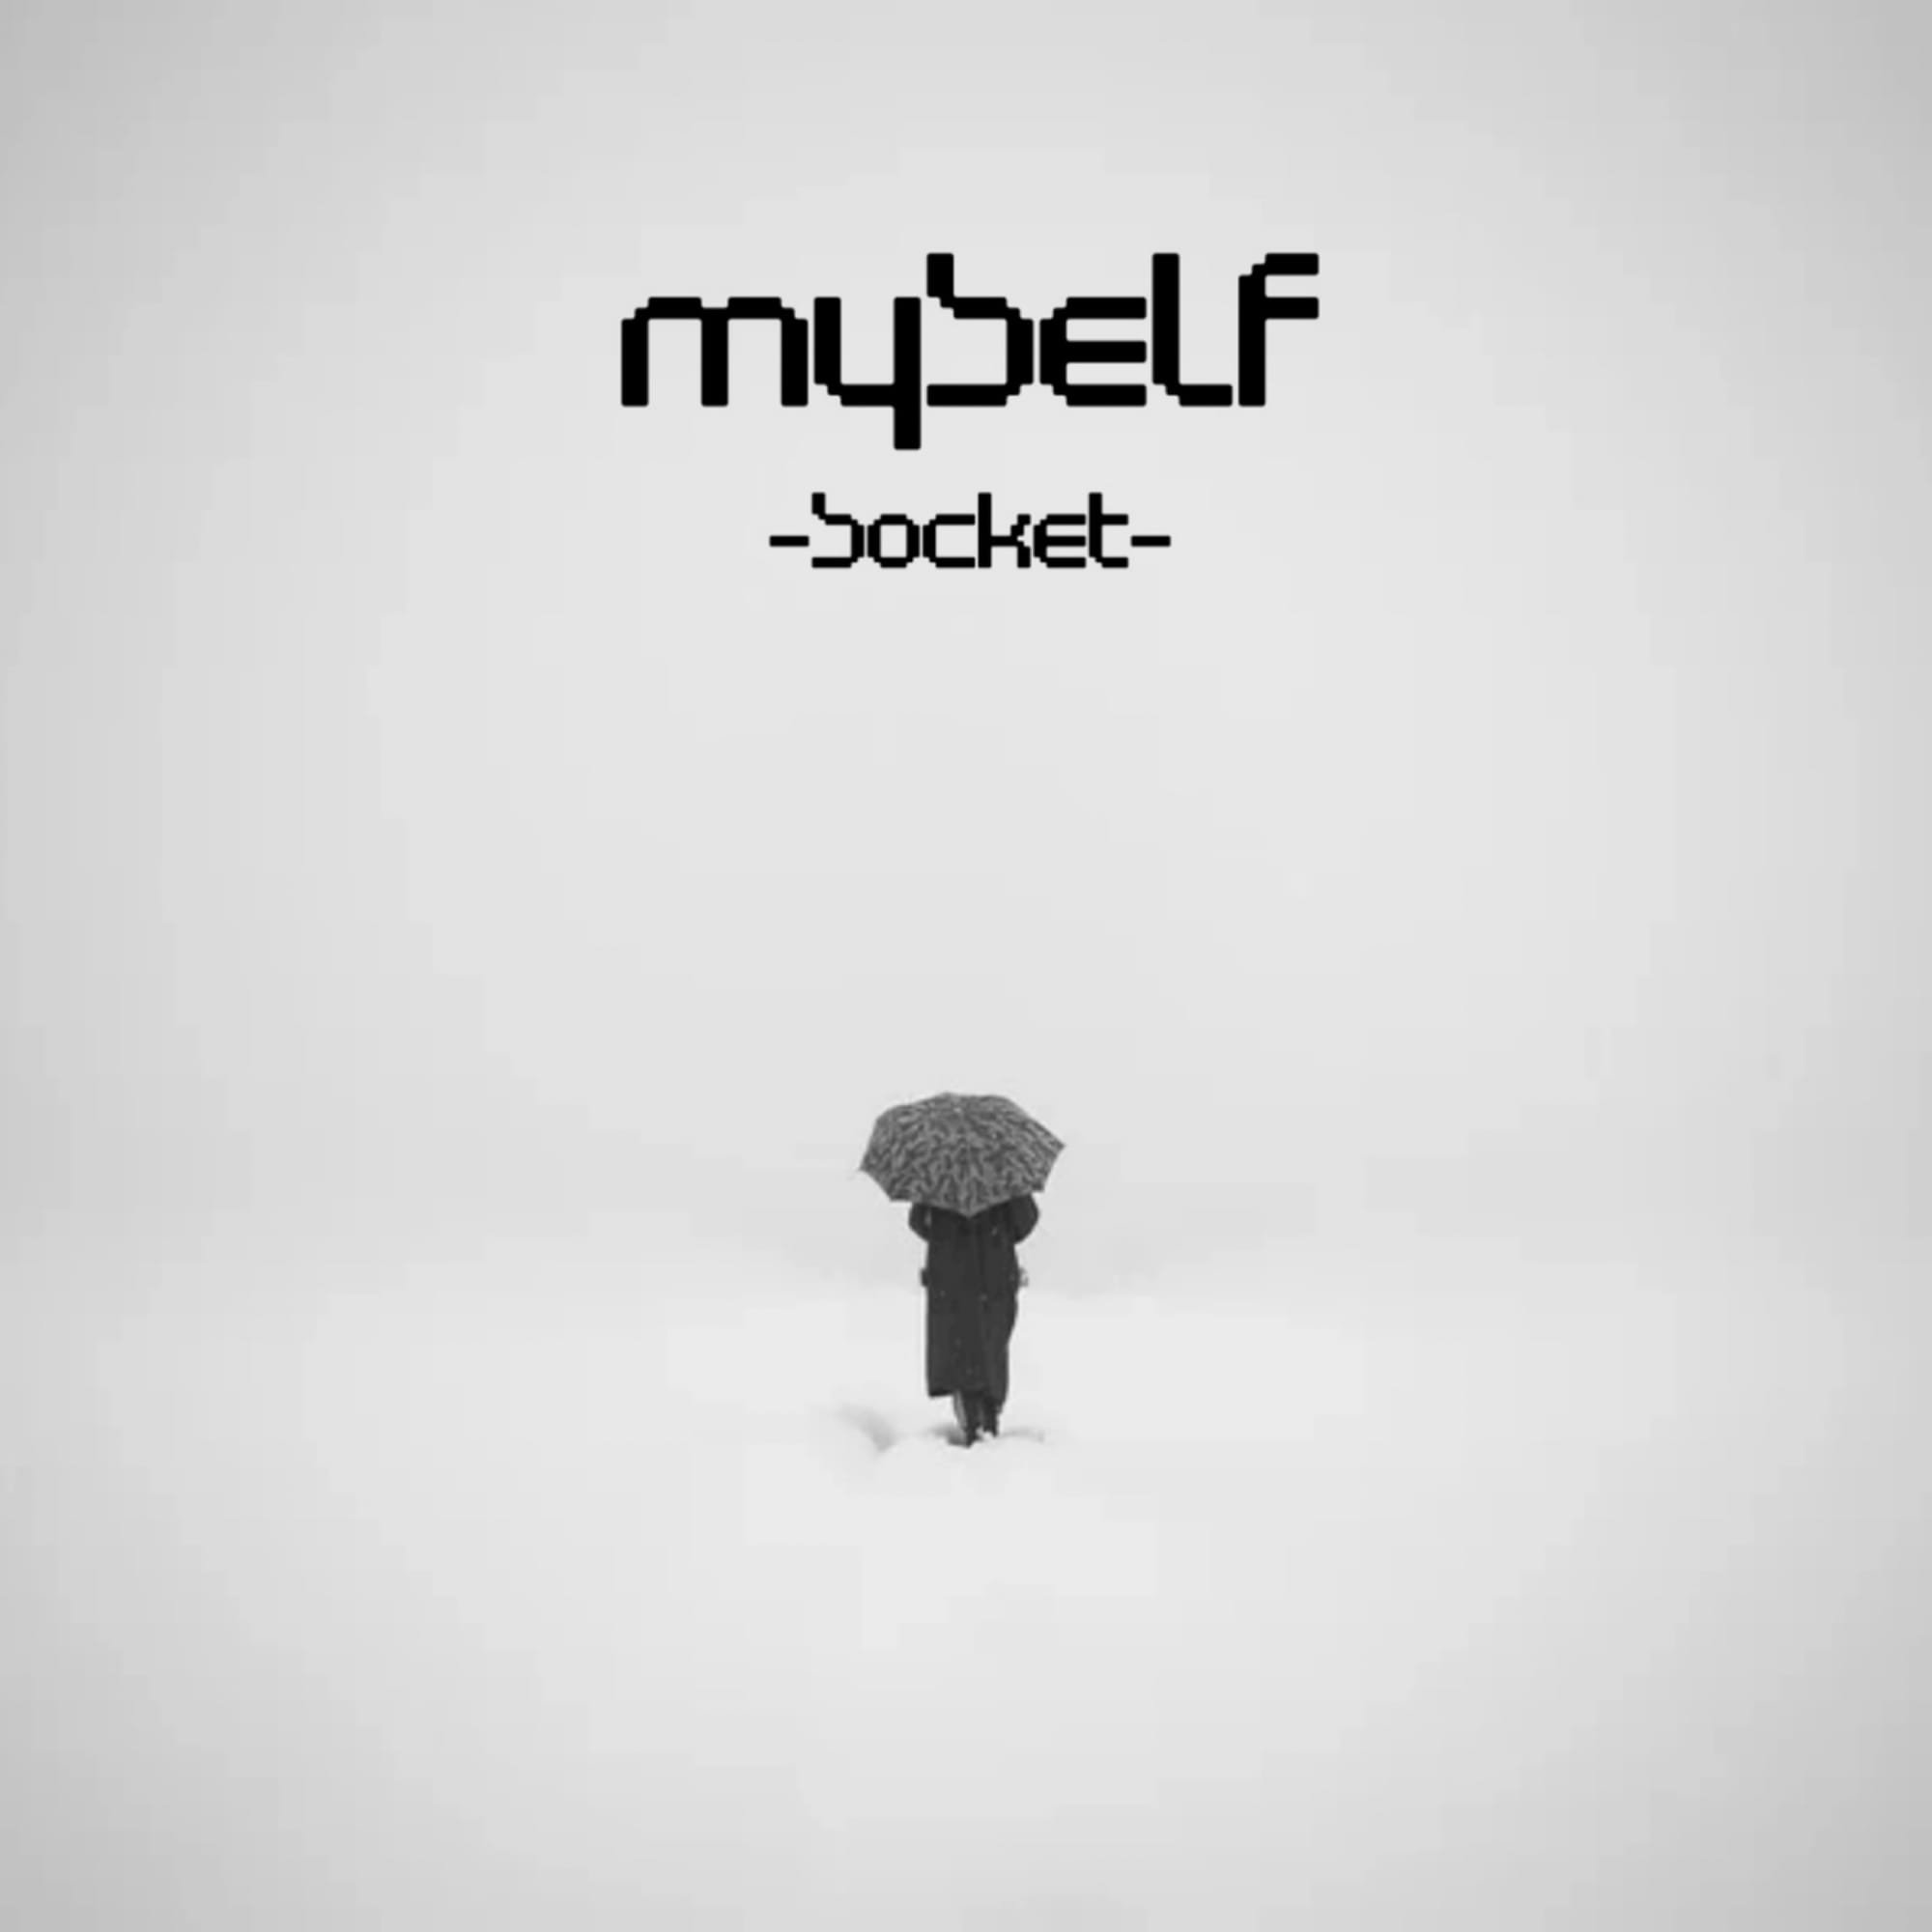 SOCKET ANNOUNCES UPCOMING SINGLE RELEASE "MYSELF"